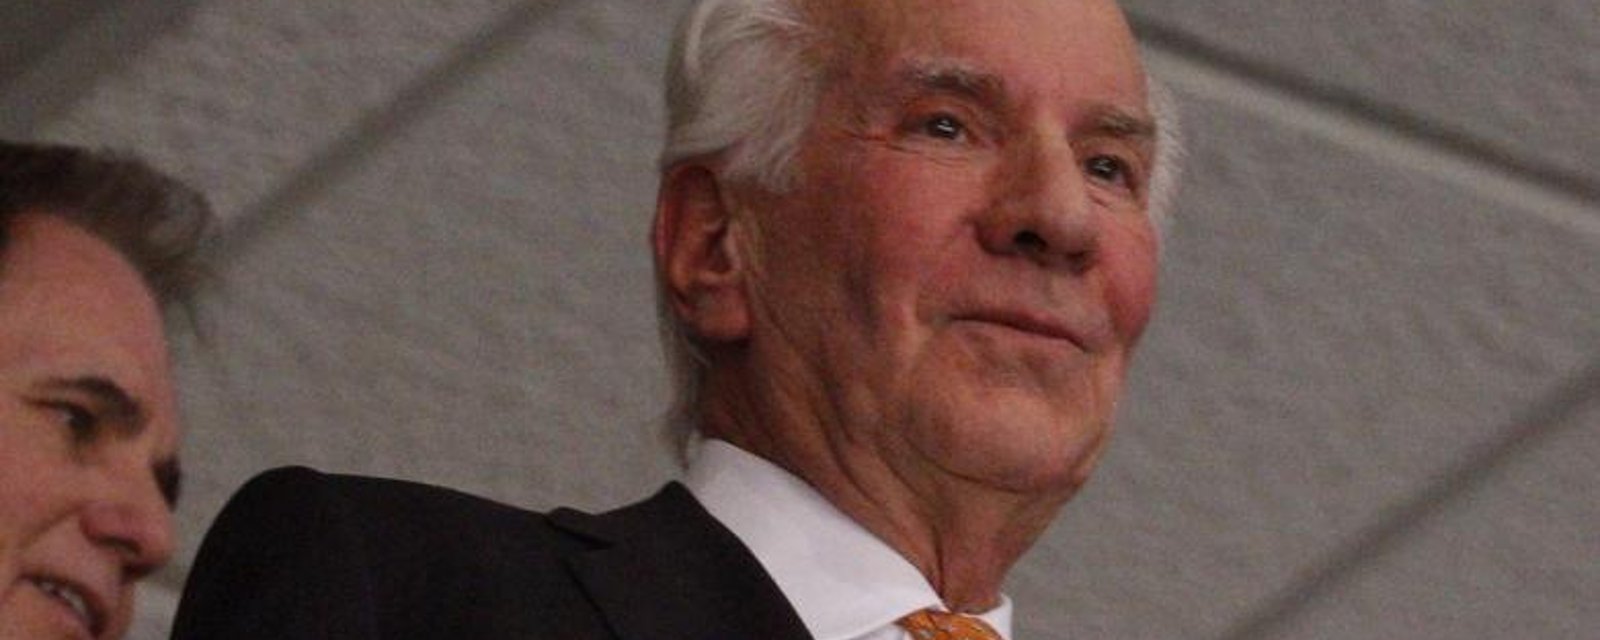 The Flyers will honor founder Ed Snider with important addition to Wells Fargo Center.